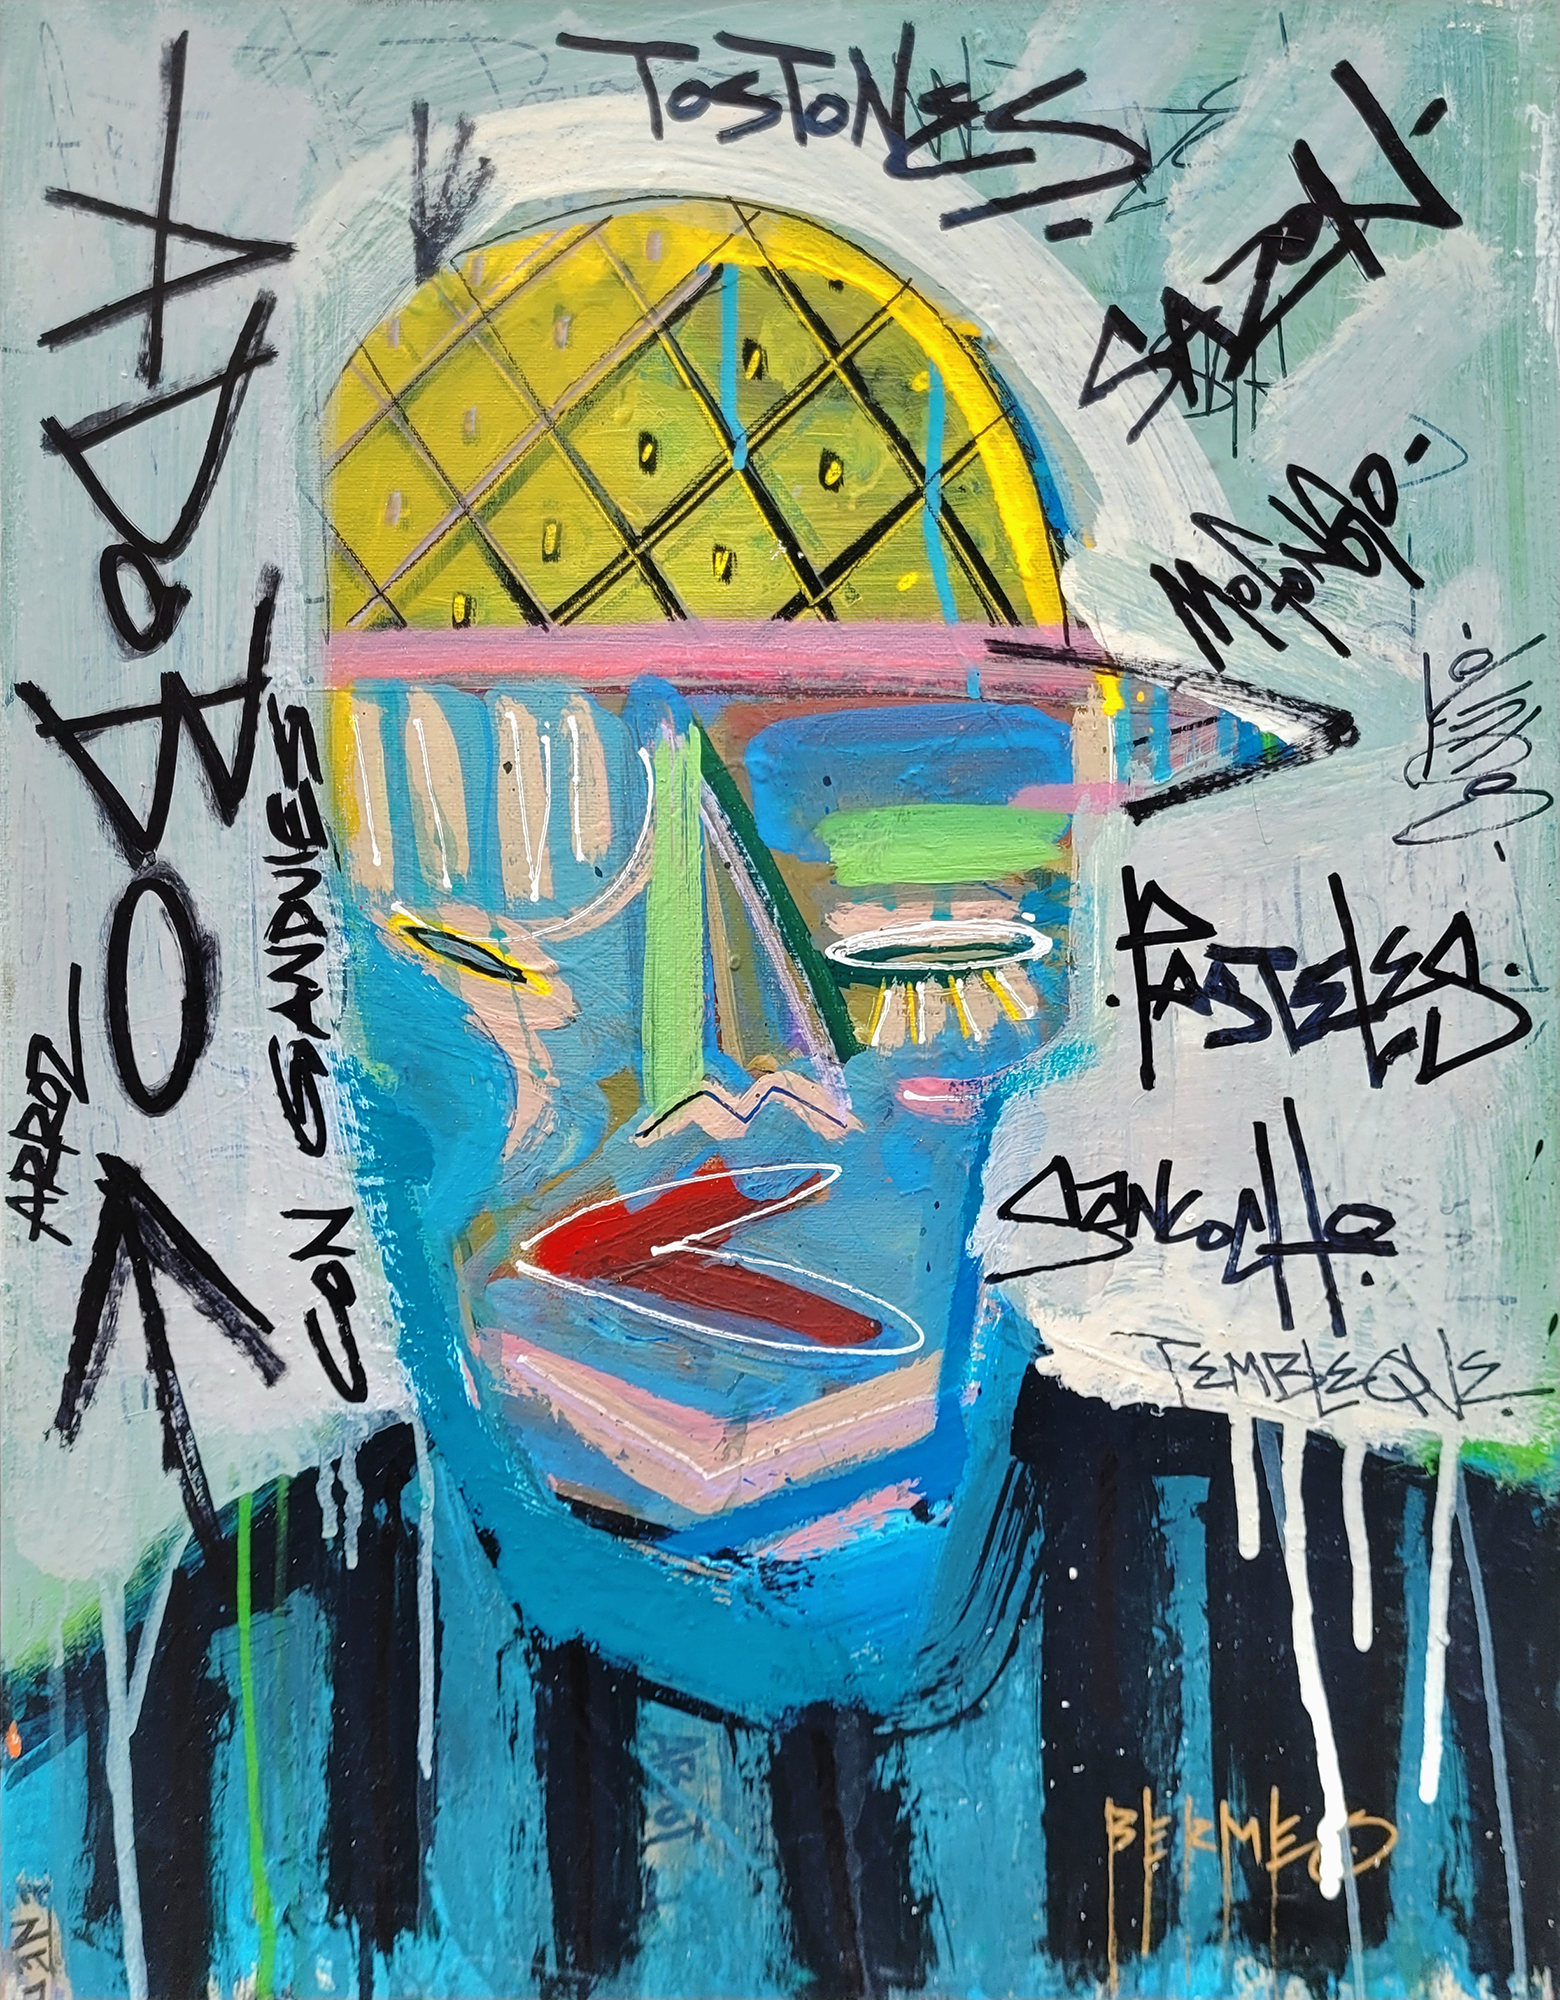   Adobo Child,  2023  20” x 16”   Acrylic, ink and spray paint on canvas     